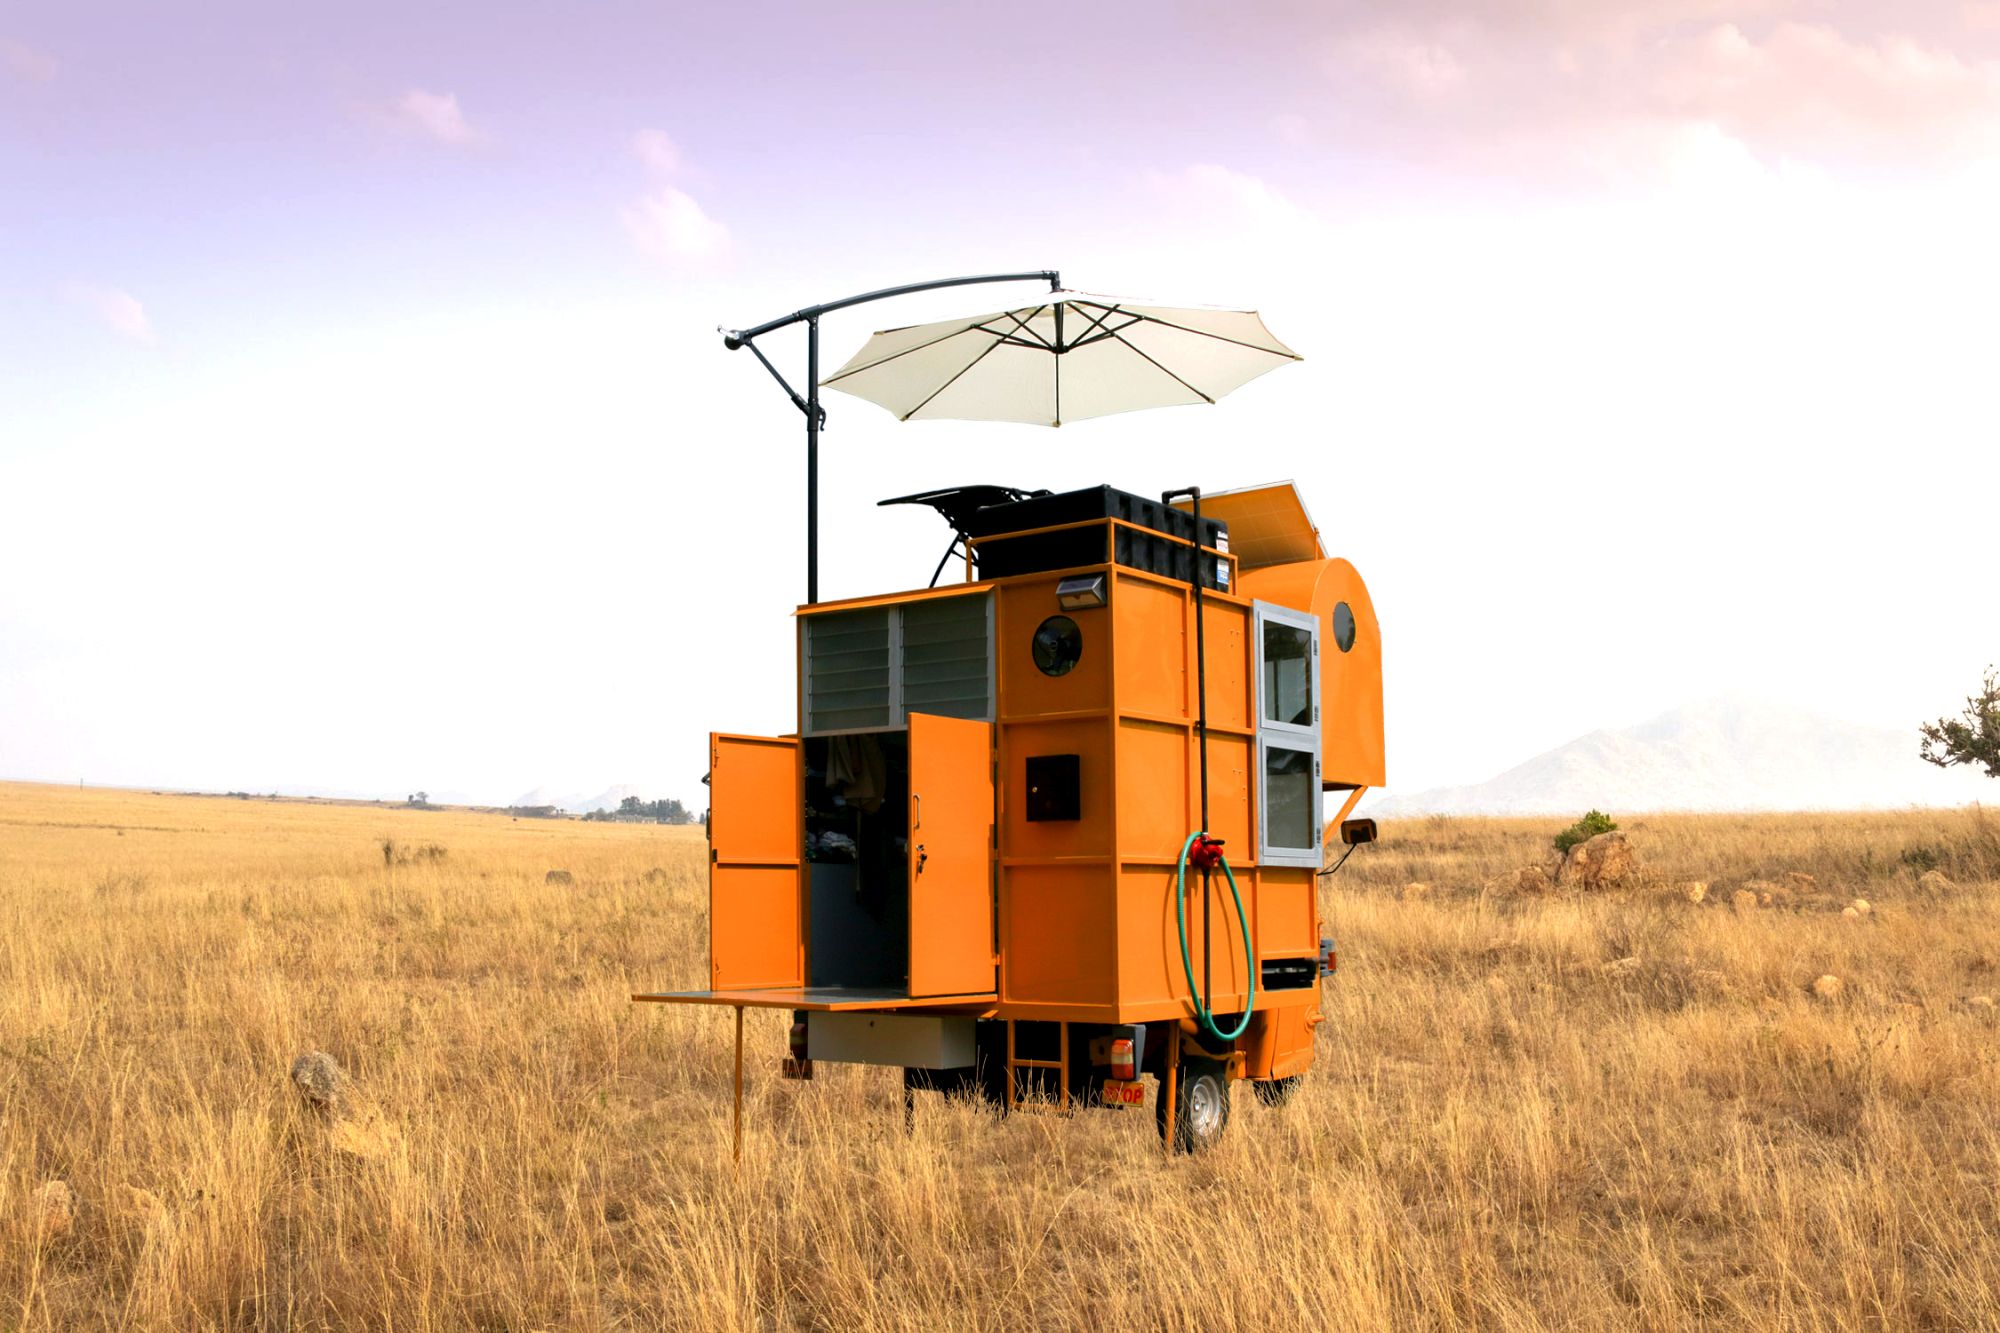 Portable Housing Concept by SOLO: 01 - Portable housing concepts in India, by The BILLBOARDS Collective